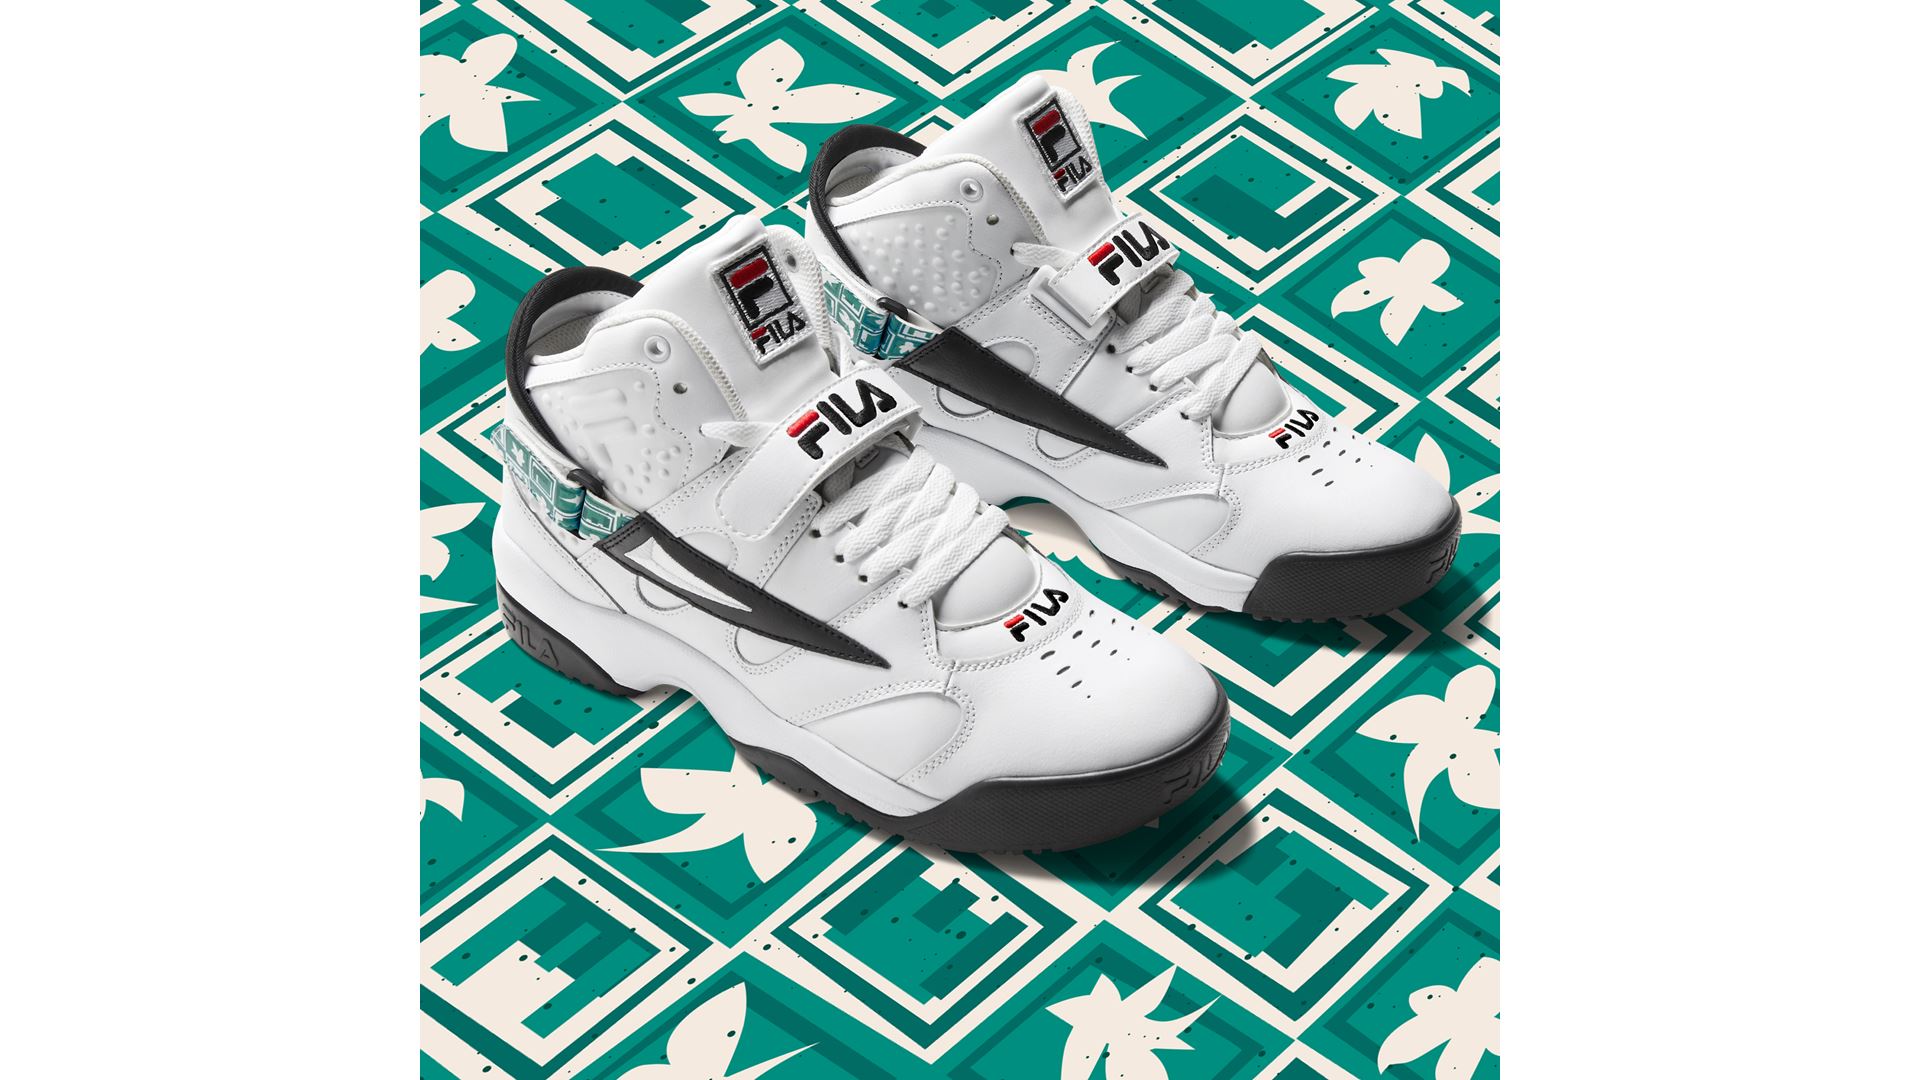 FILA Launches Limited Edition Spoiler x Grant Hill Draft Day Silhouette